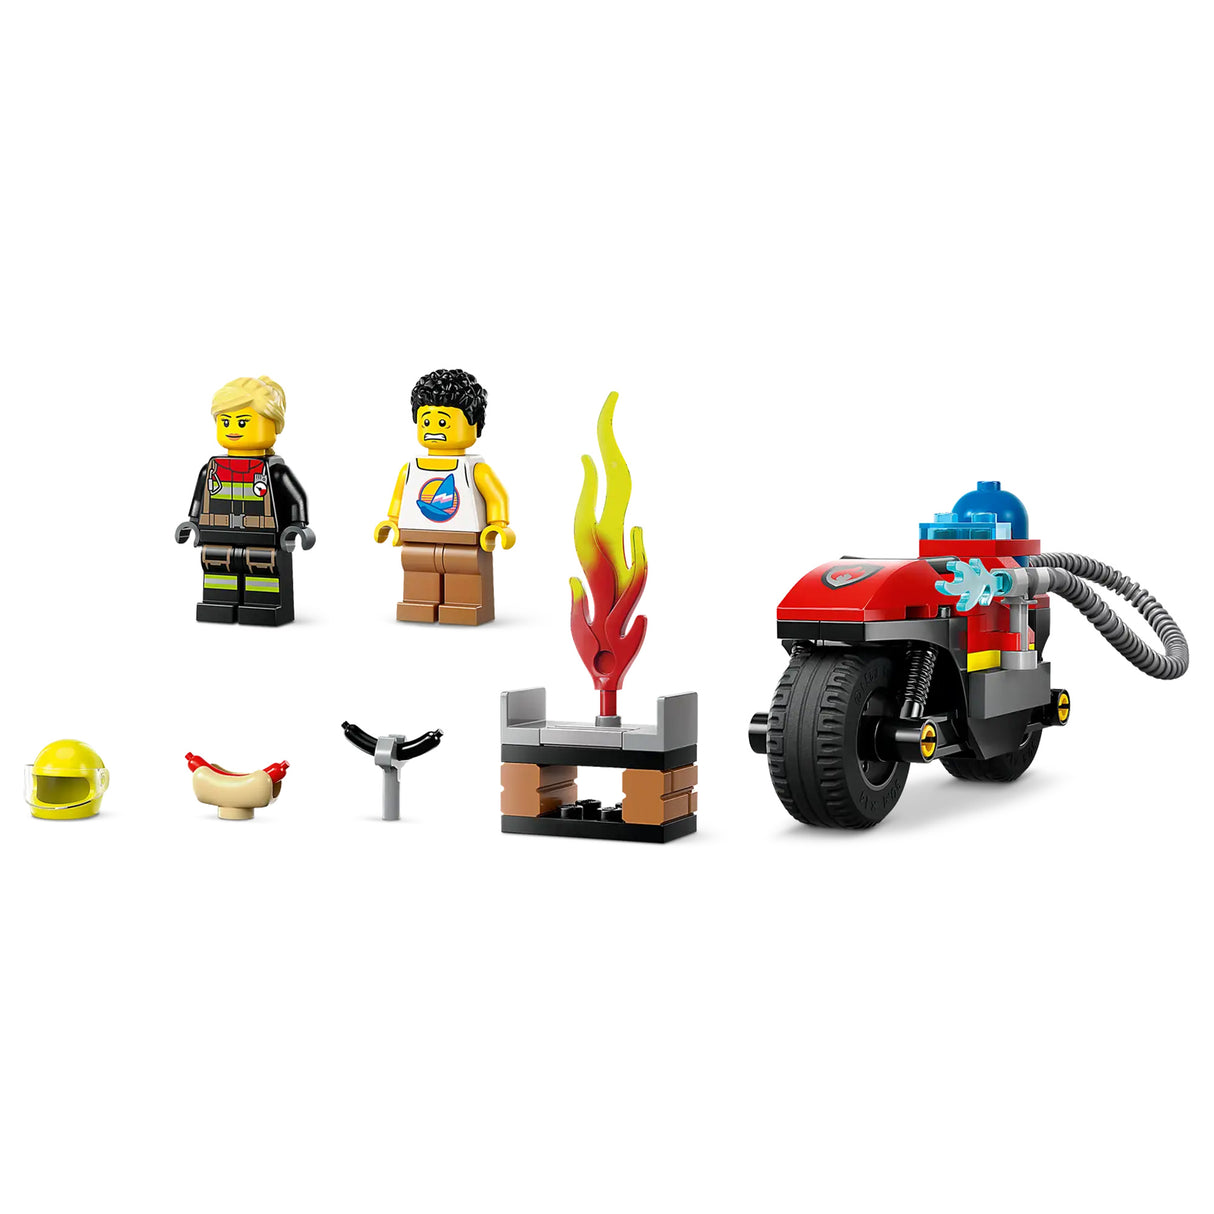 LEGO City Fire Rescue Motorcycle 60410, (57-pieces)